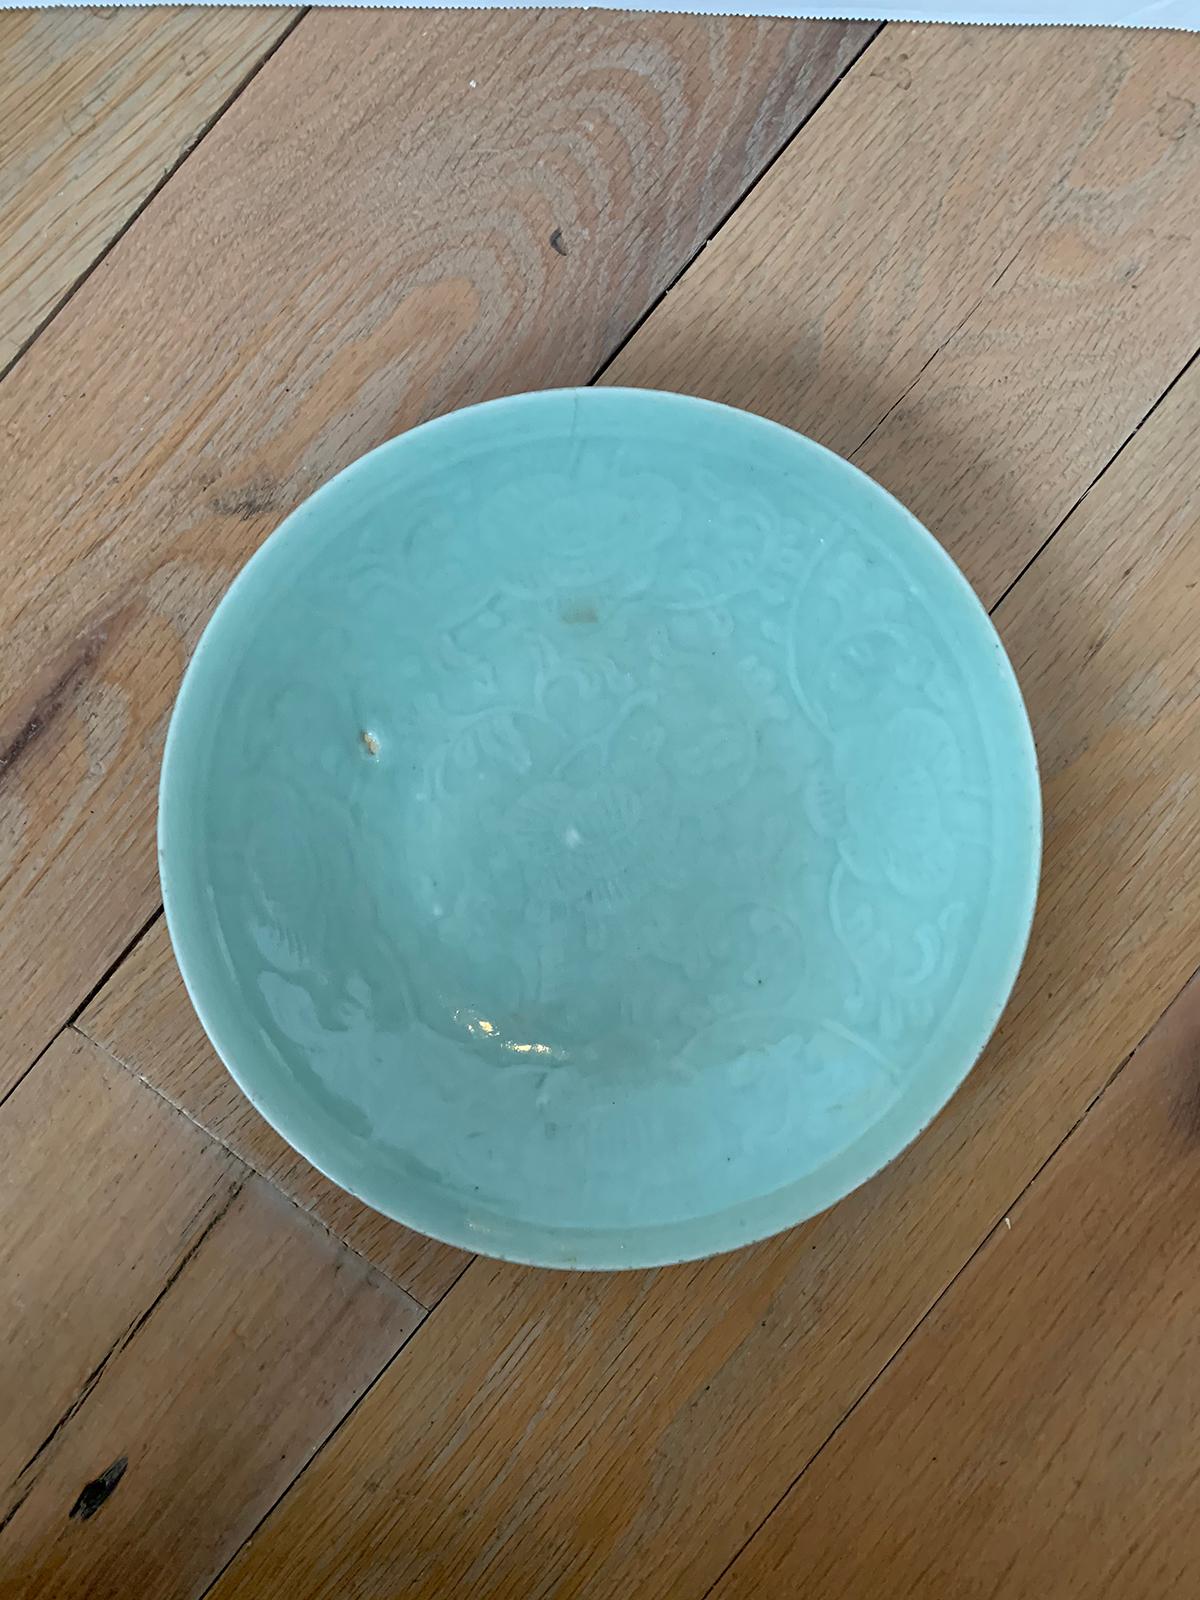 18th century Chinese Porcelain celadon dish with faint floral design, unmarked.